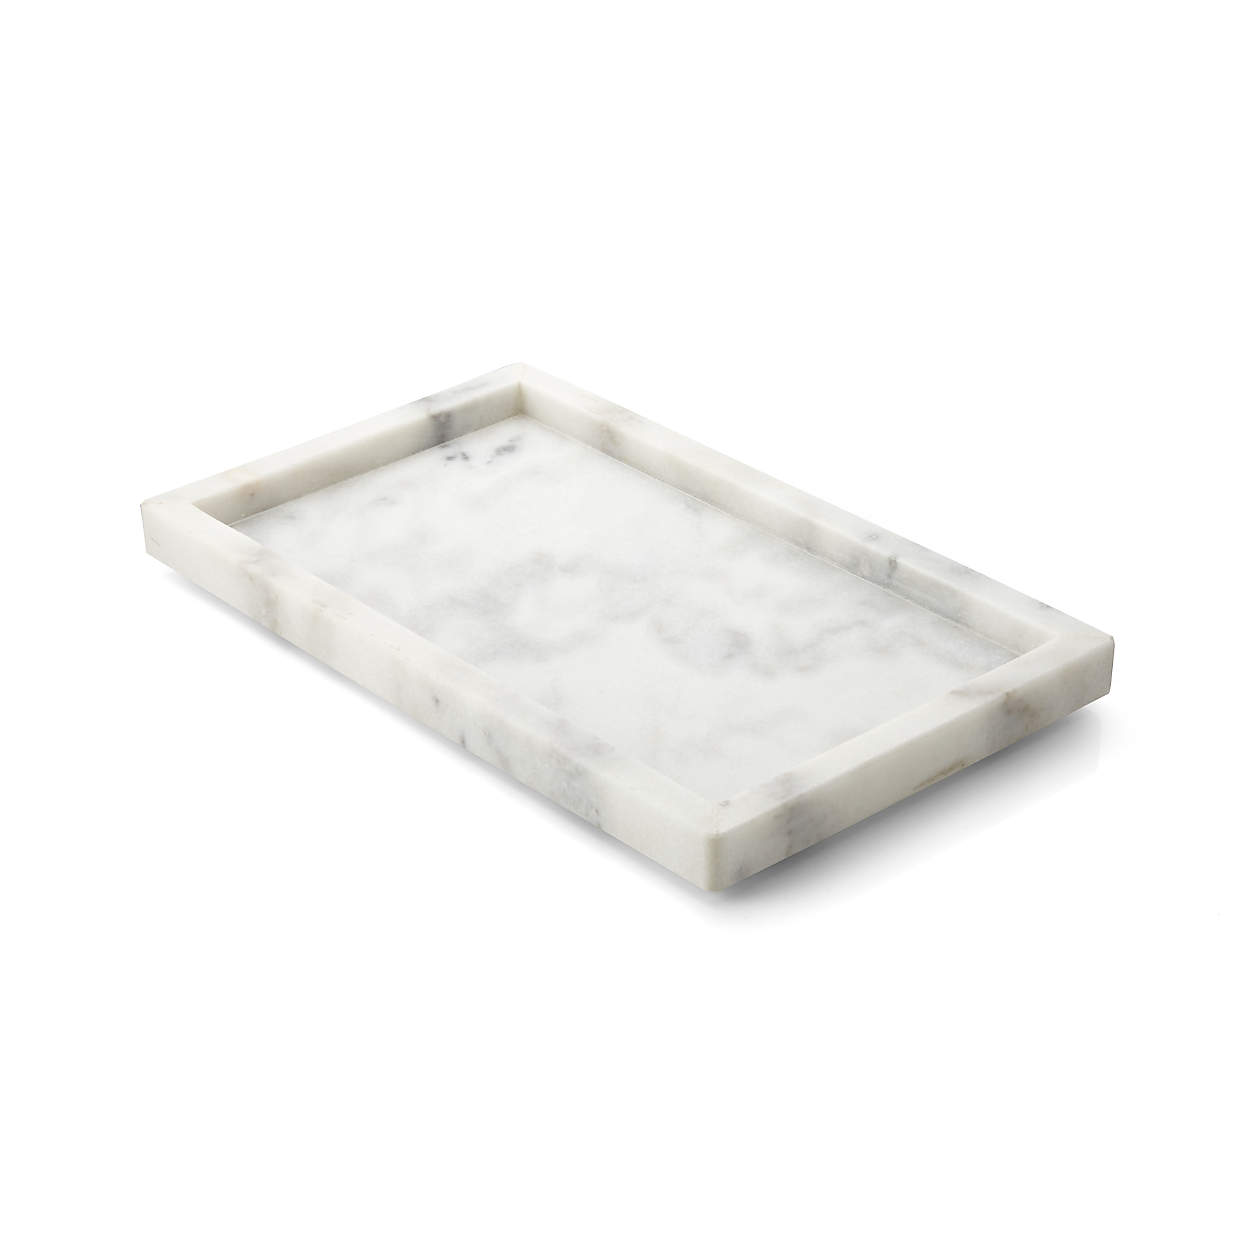 Shop French Kitchen Marble Rectangle Tray from Crate and Barrel on Openhaus